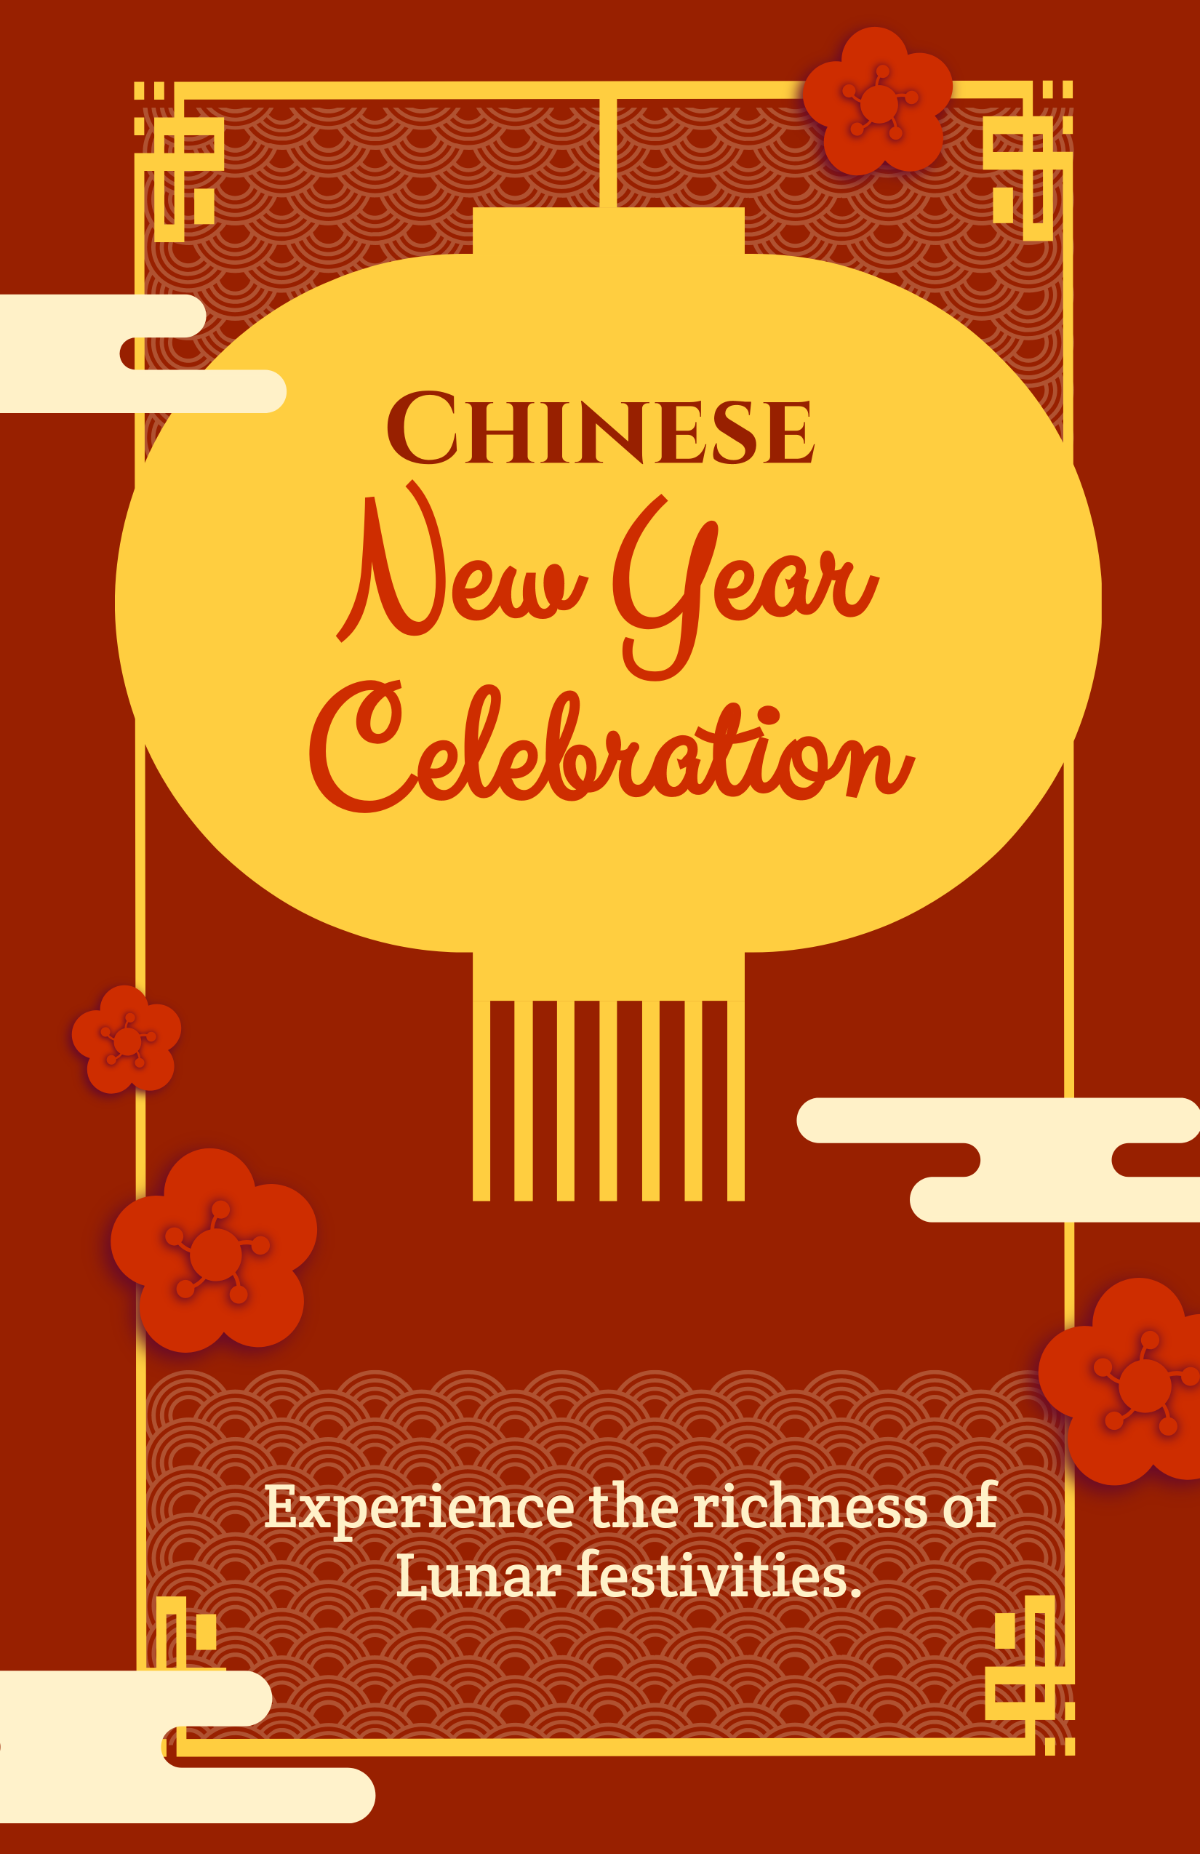 Chinese New Year Celebration Poster Template